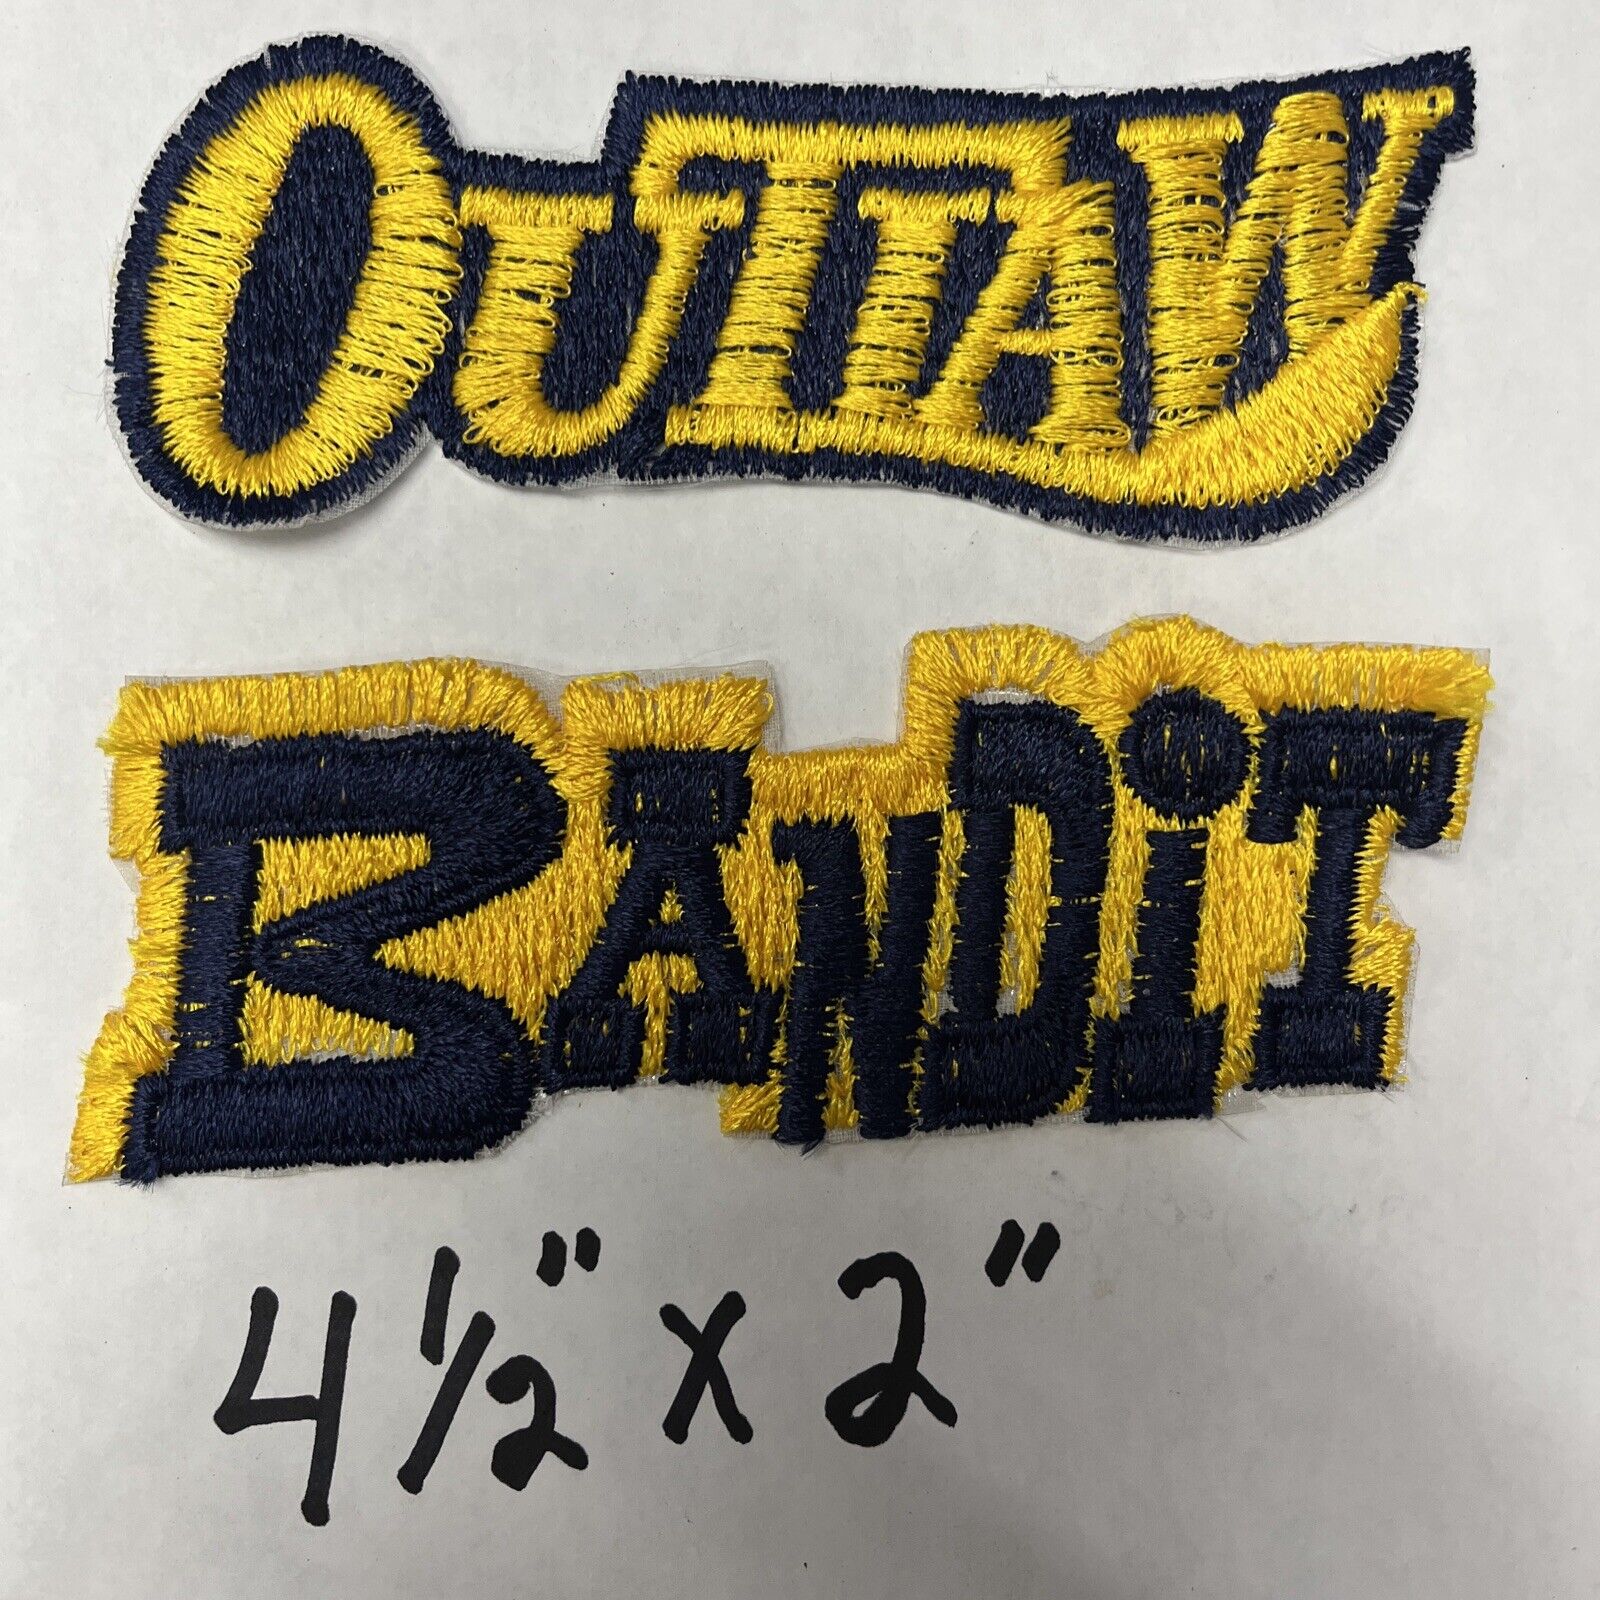 NEW Vintage Outlaw or Bandit patch buy 1 or buy Both Over 25 Yrs Old